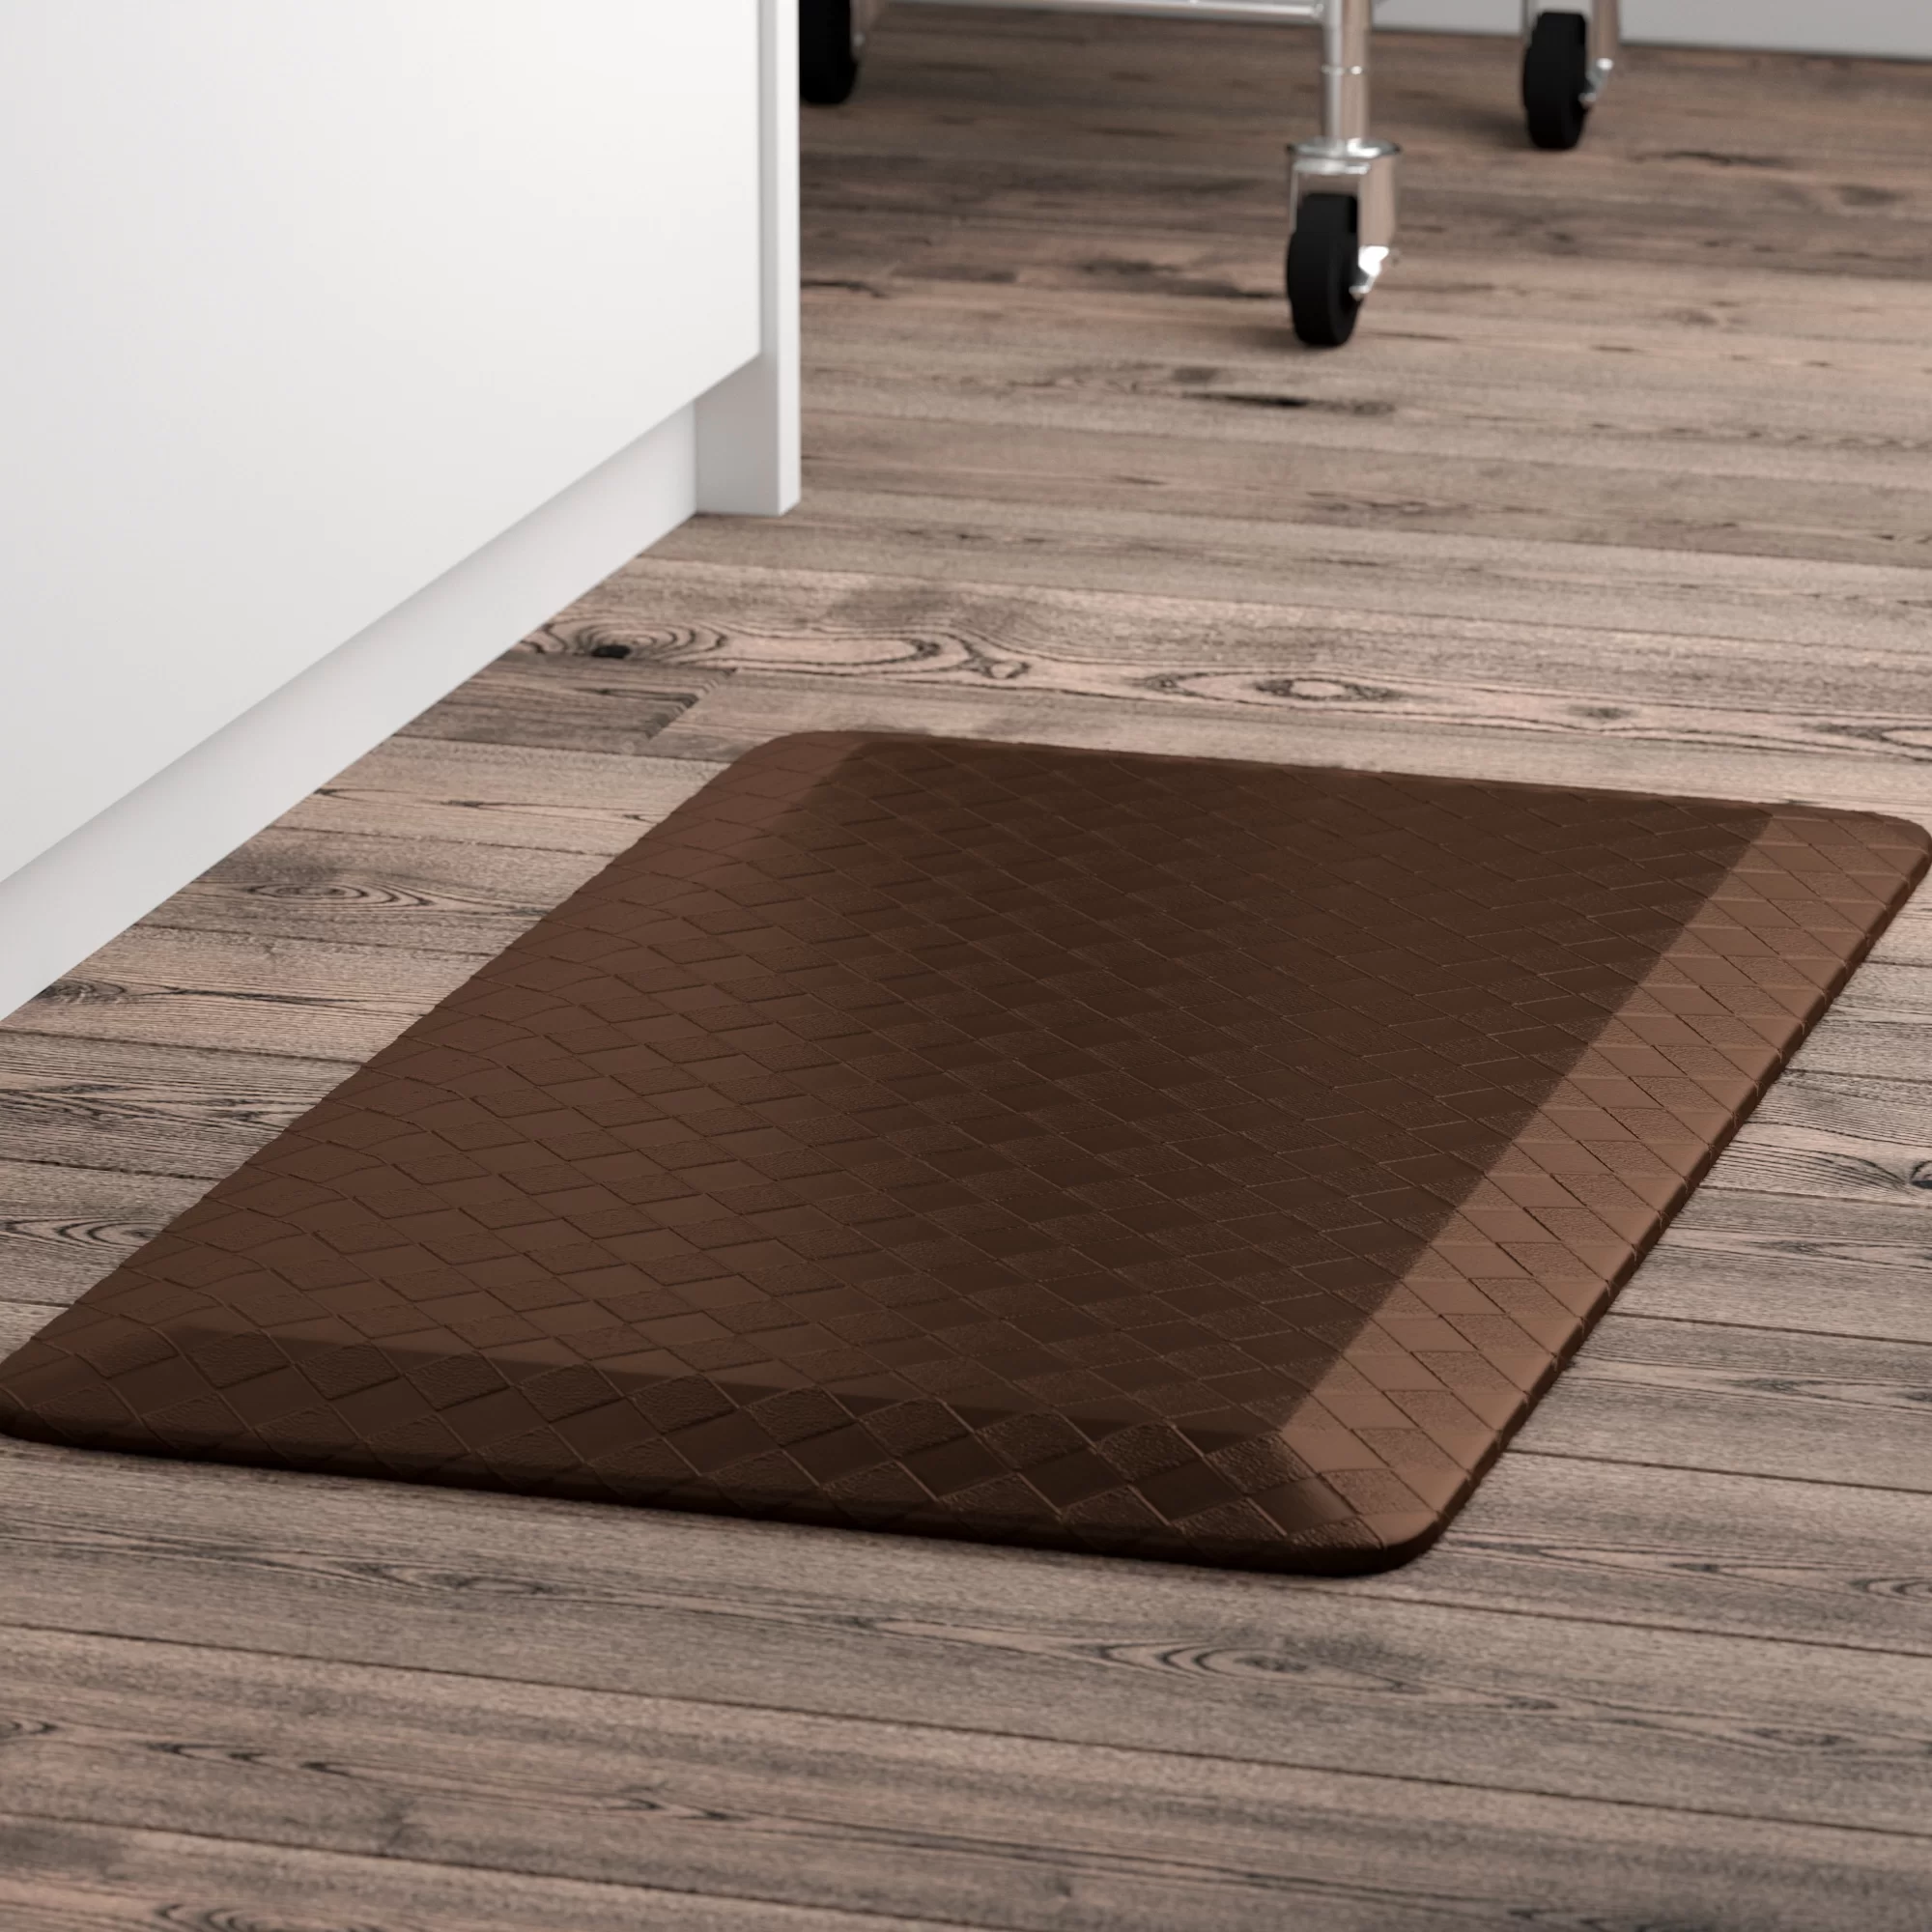 Example of a low-pile rubber kitchen mat 